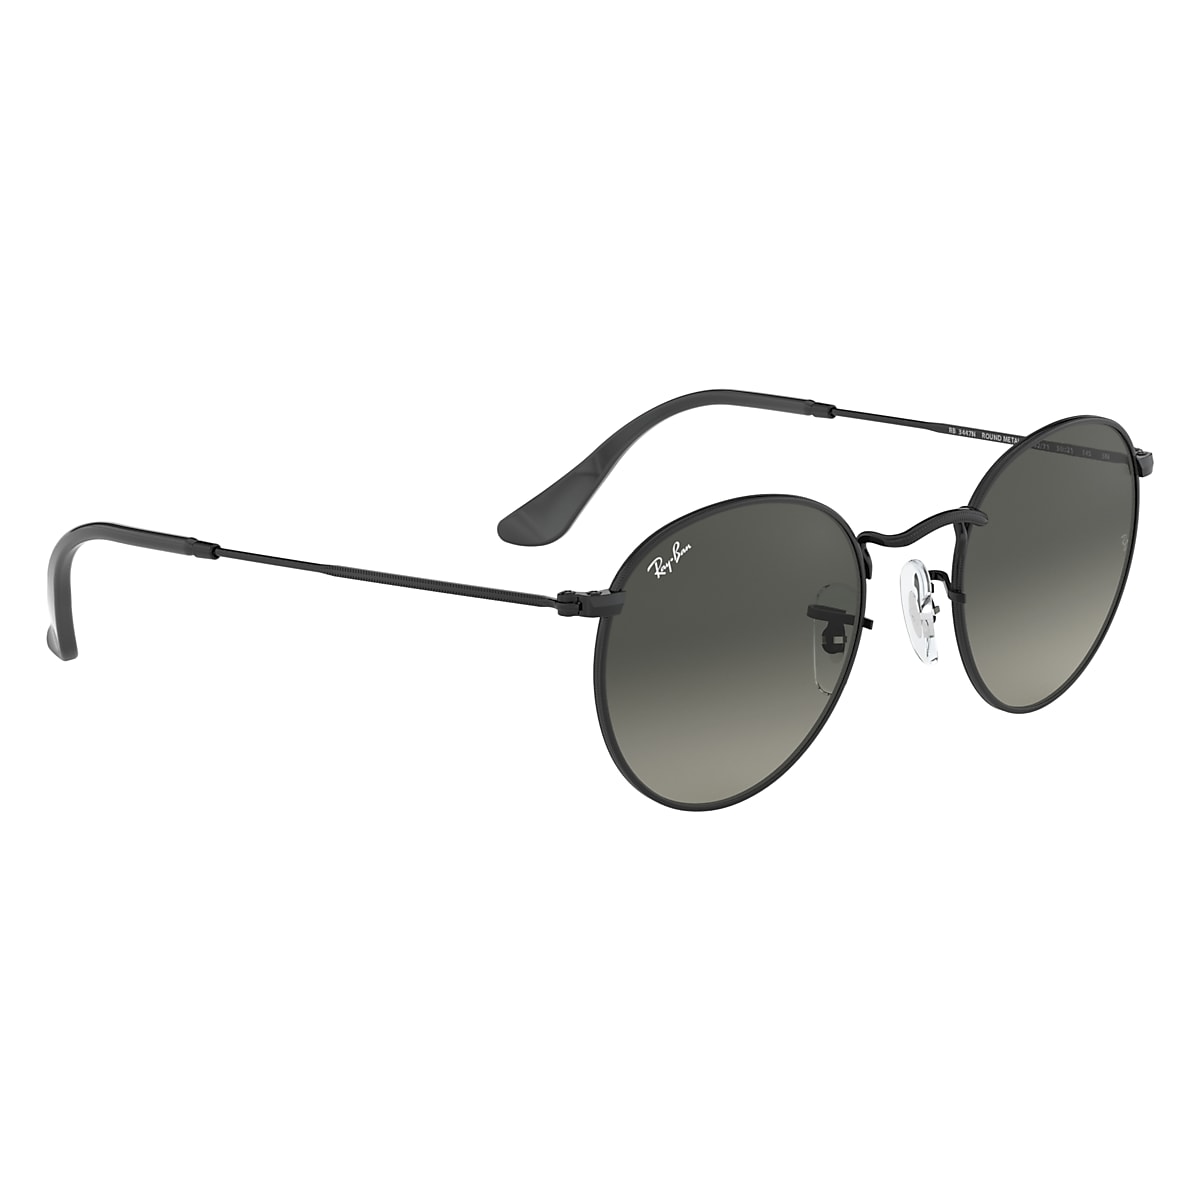 ROUND - Sunglasses and Grey Black US RB3447N Ray-Ban® FLAT LENSES | in